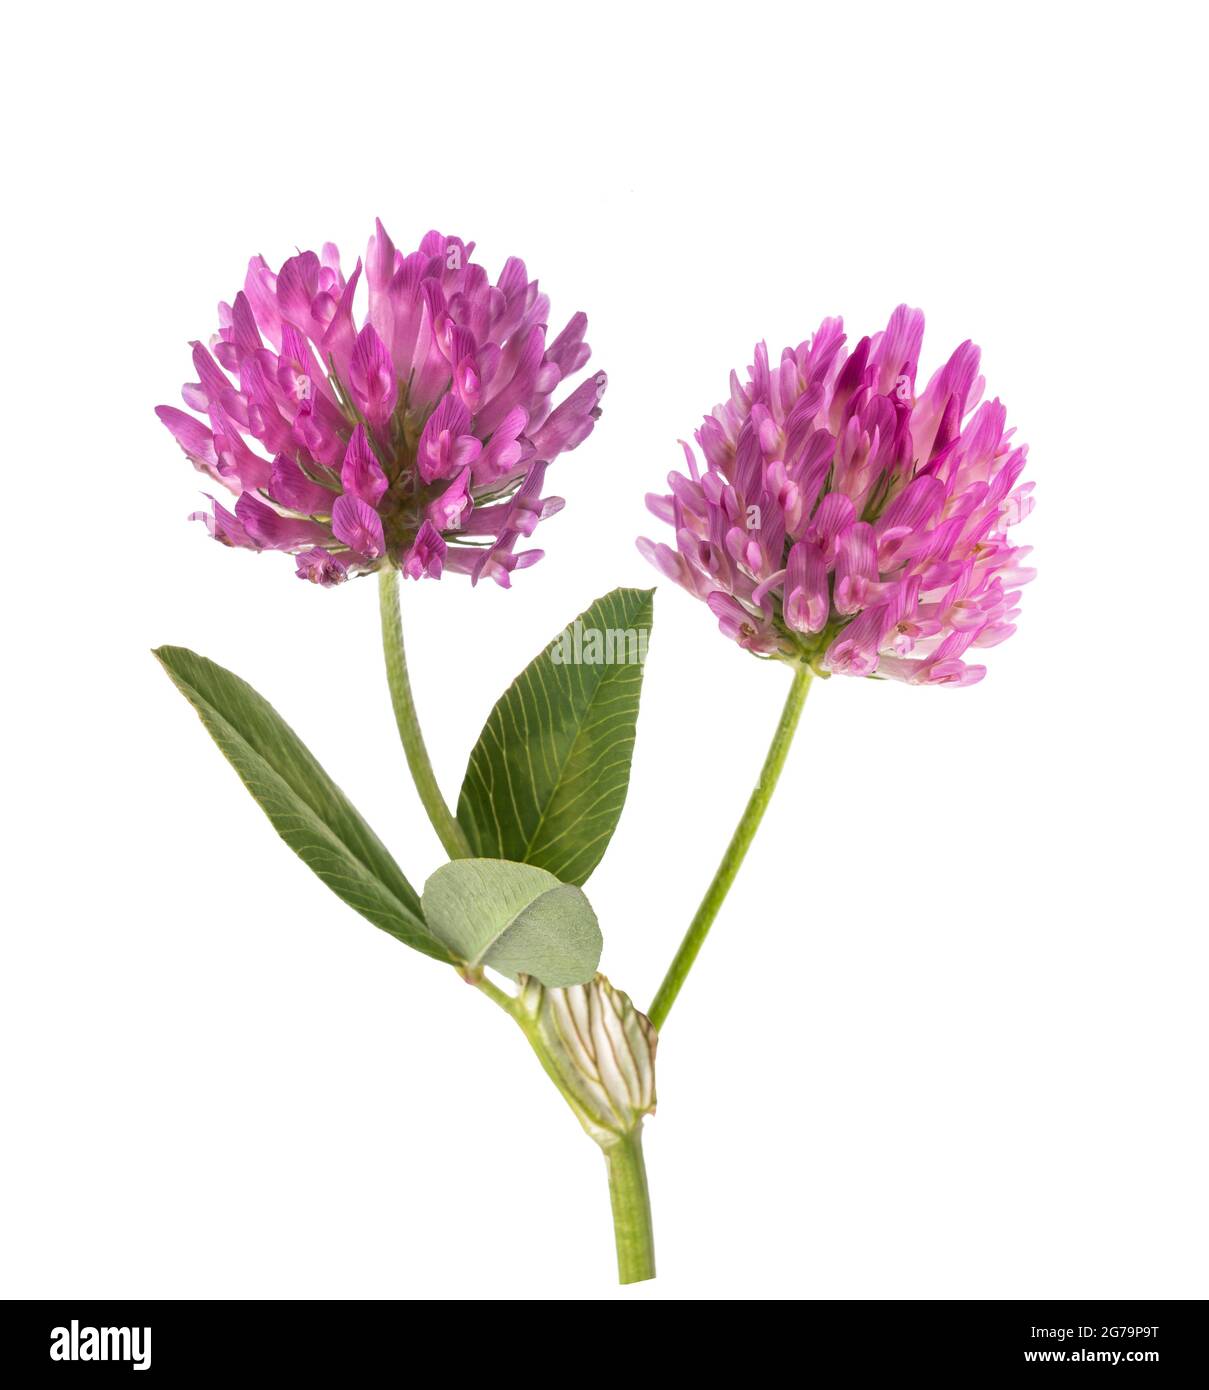 Clover flowers  isolated on white background Stock Photo